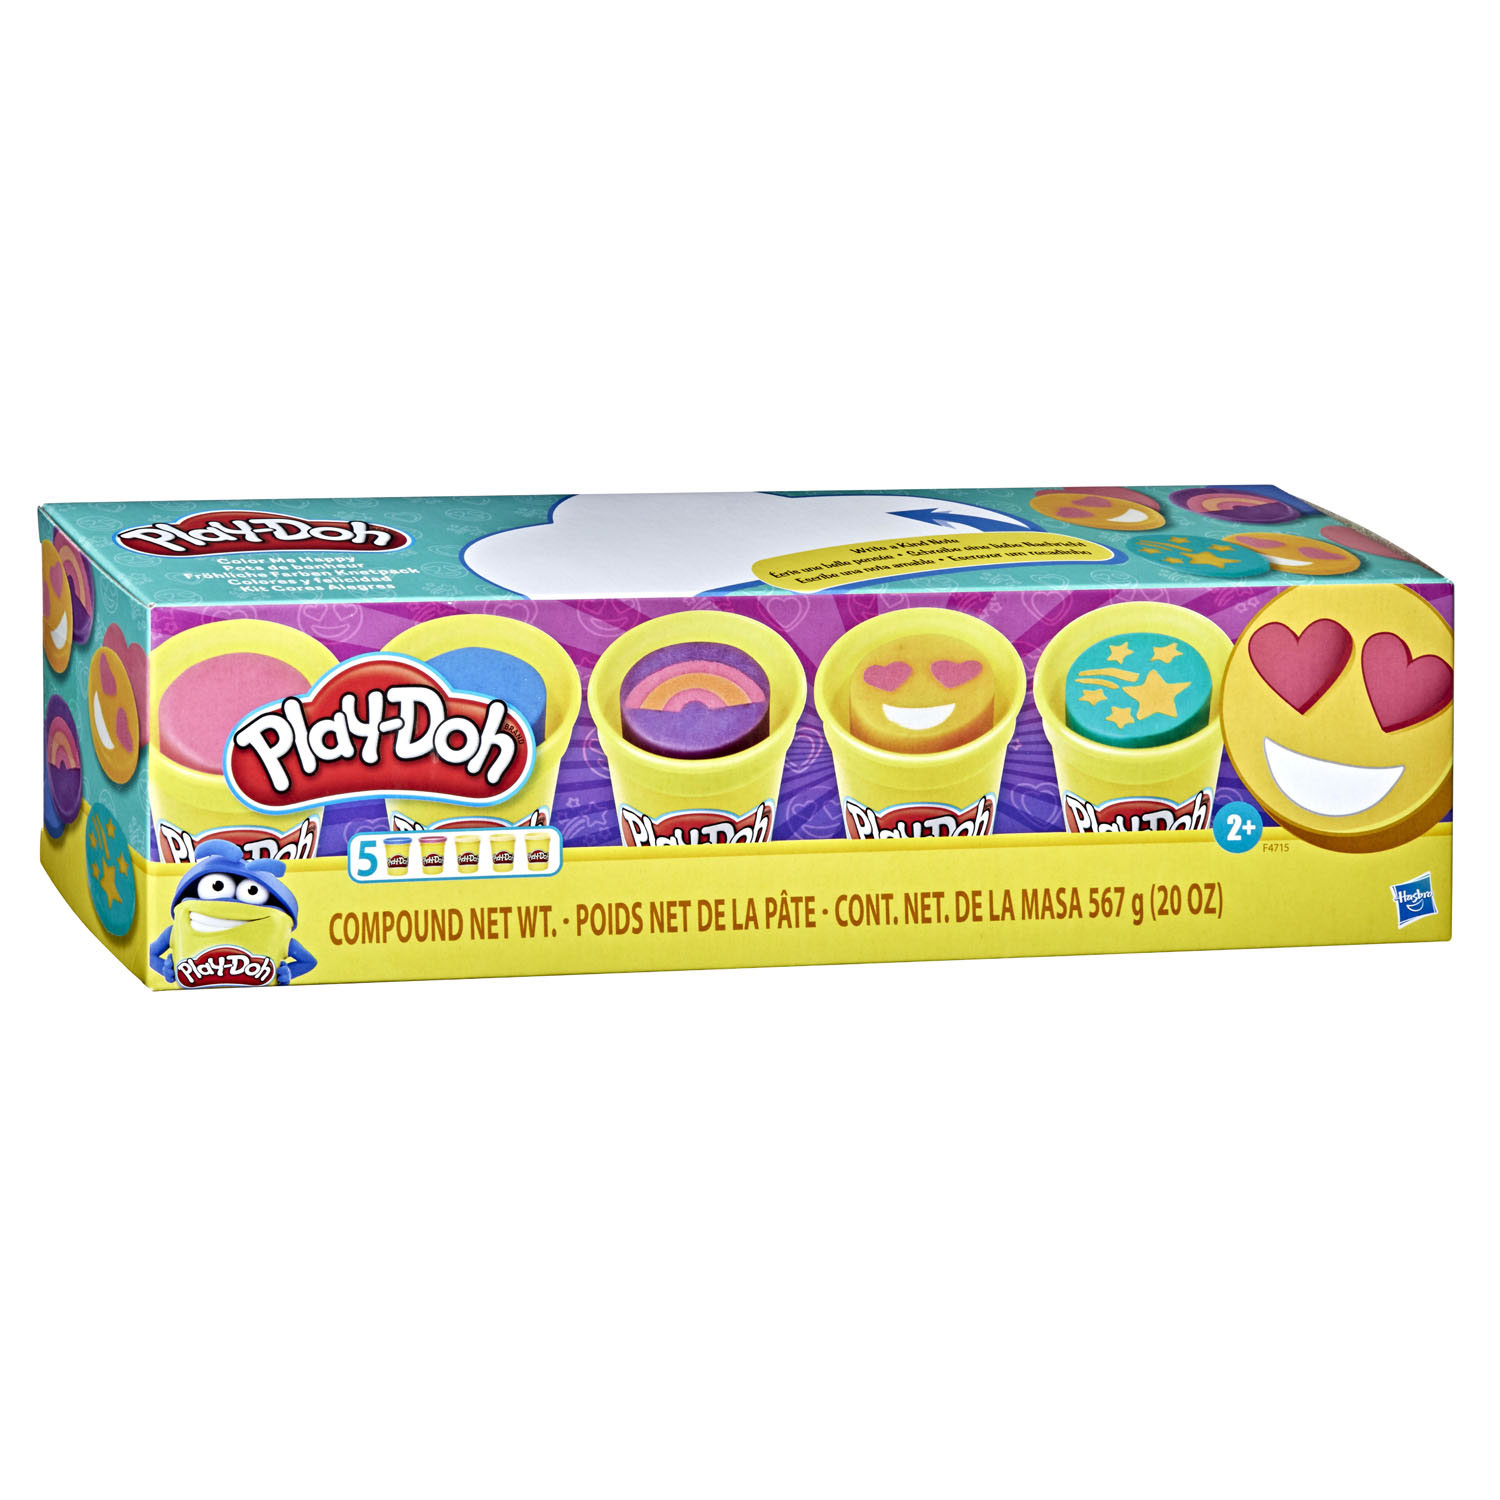 Play-Doh Color Me Happy 5-Pack with 3 Emoji-Inspired Cans for Kids